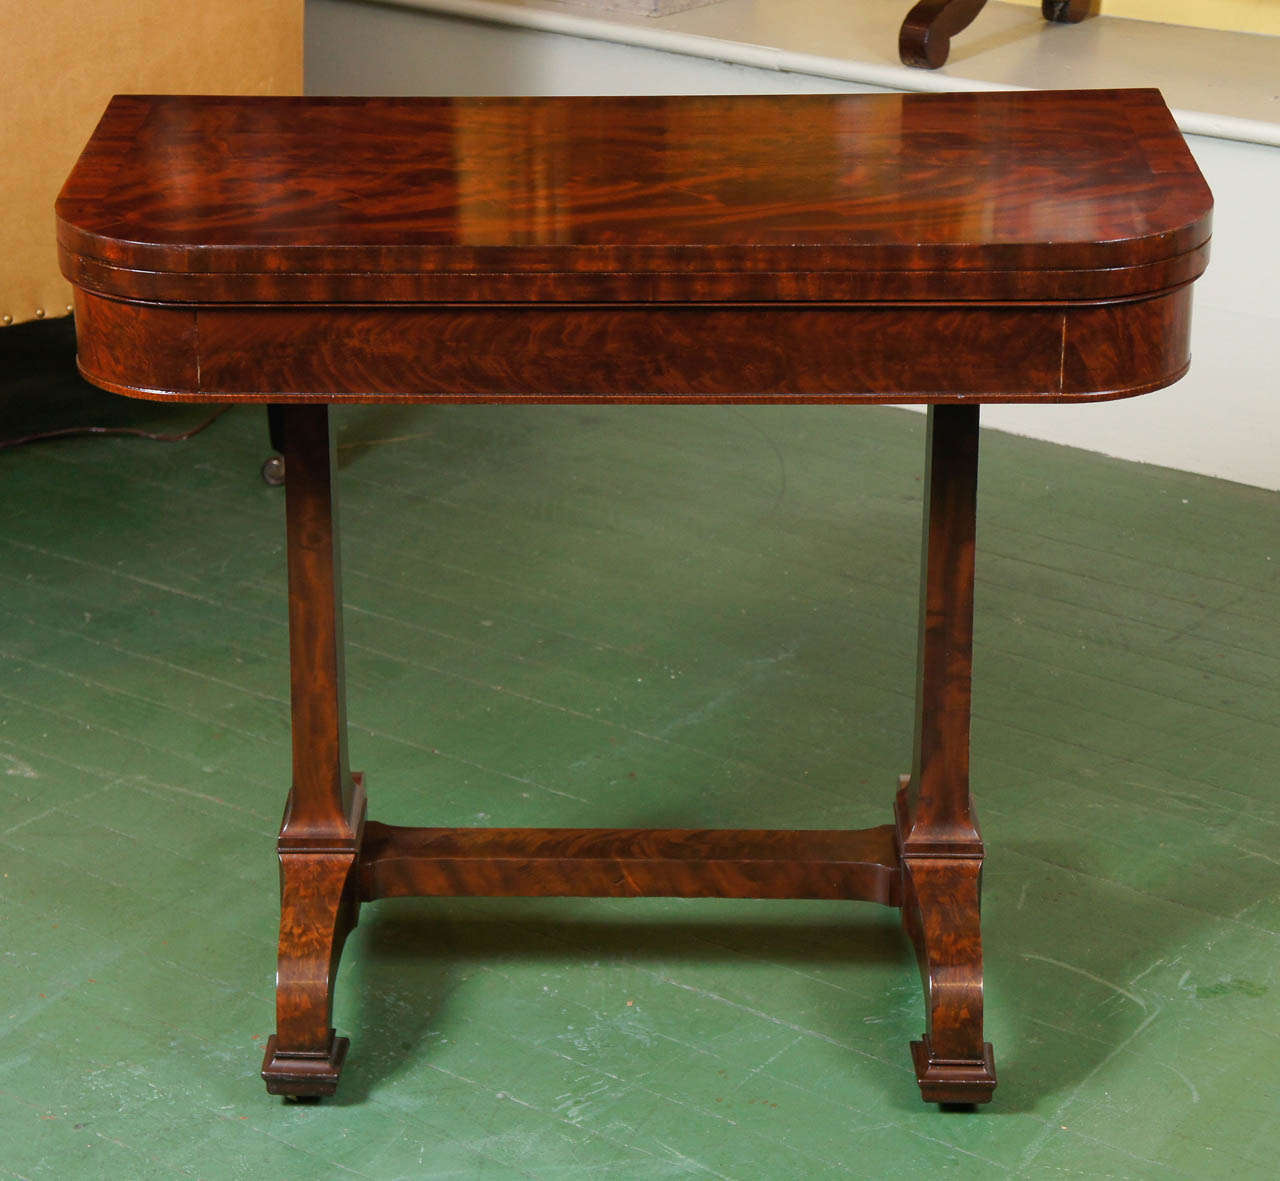 This fine period New York City card table was made by Duncan Phyfe in or a round 1830. This master craftsmen of the city was one of the most stylish and important cabinet makers of the time. This exquisite card table is made in what is called the